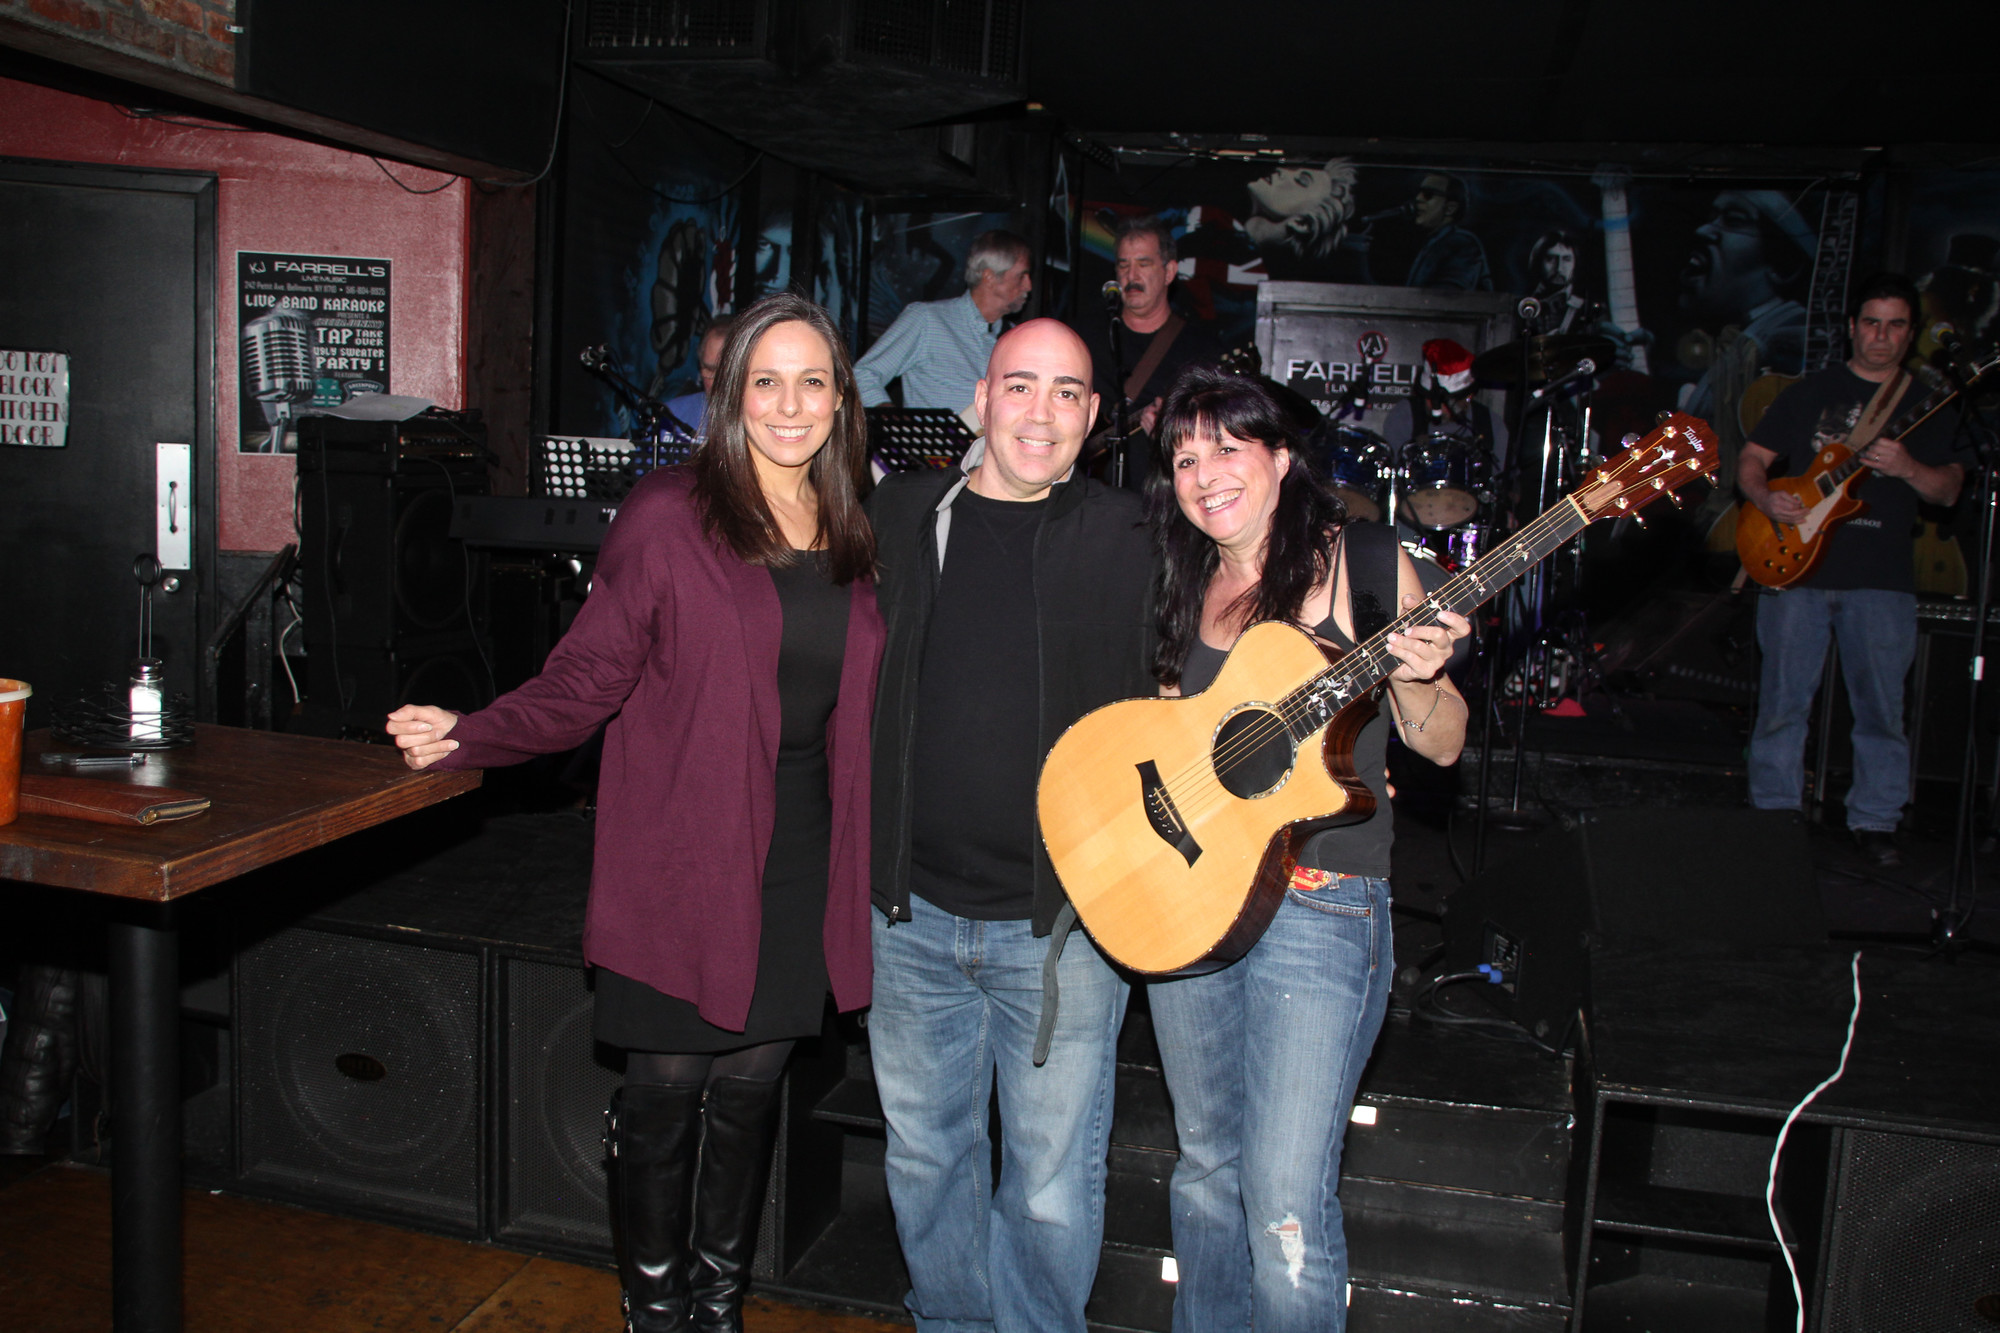 Greta Guarton, executive director of the Long Island Coalition for the Homeless, KJ Farrell’s owner Kevin Sheehan and Carine Firestone, a Bellmore resident who organized an event to benefit the charity at the restaurant, gathered for a day of philanthropy and fun.